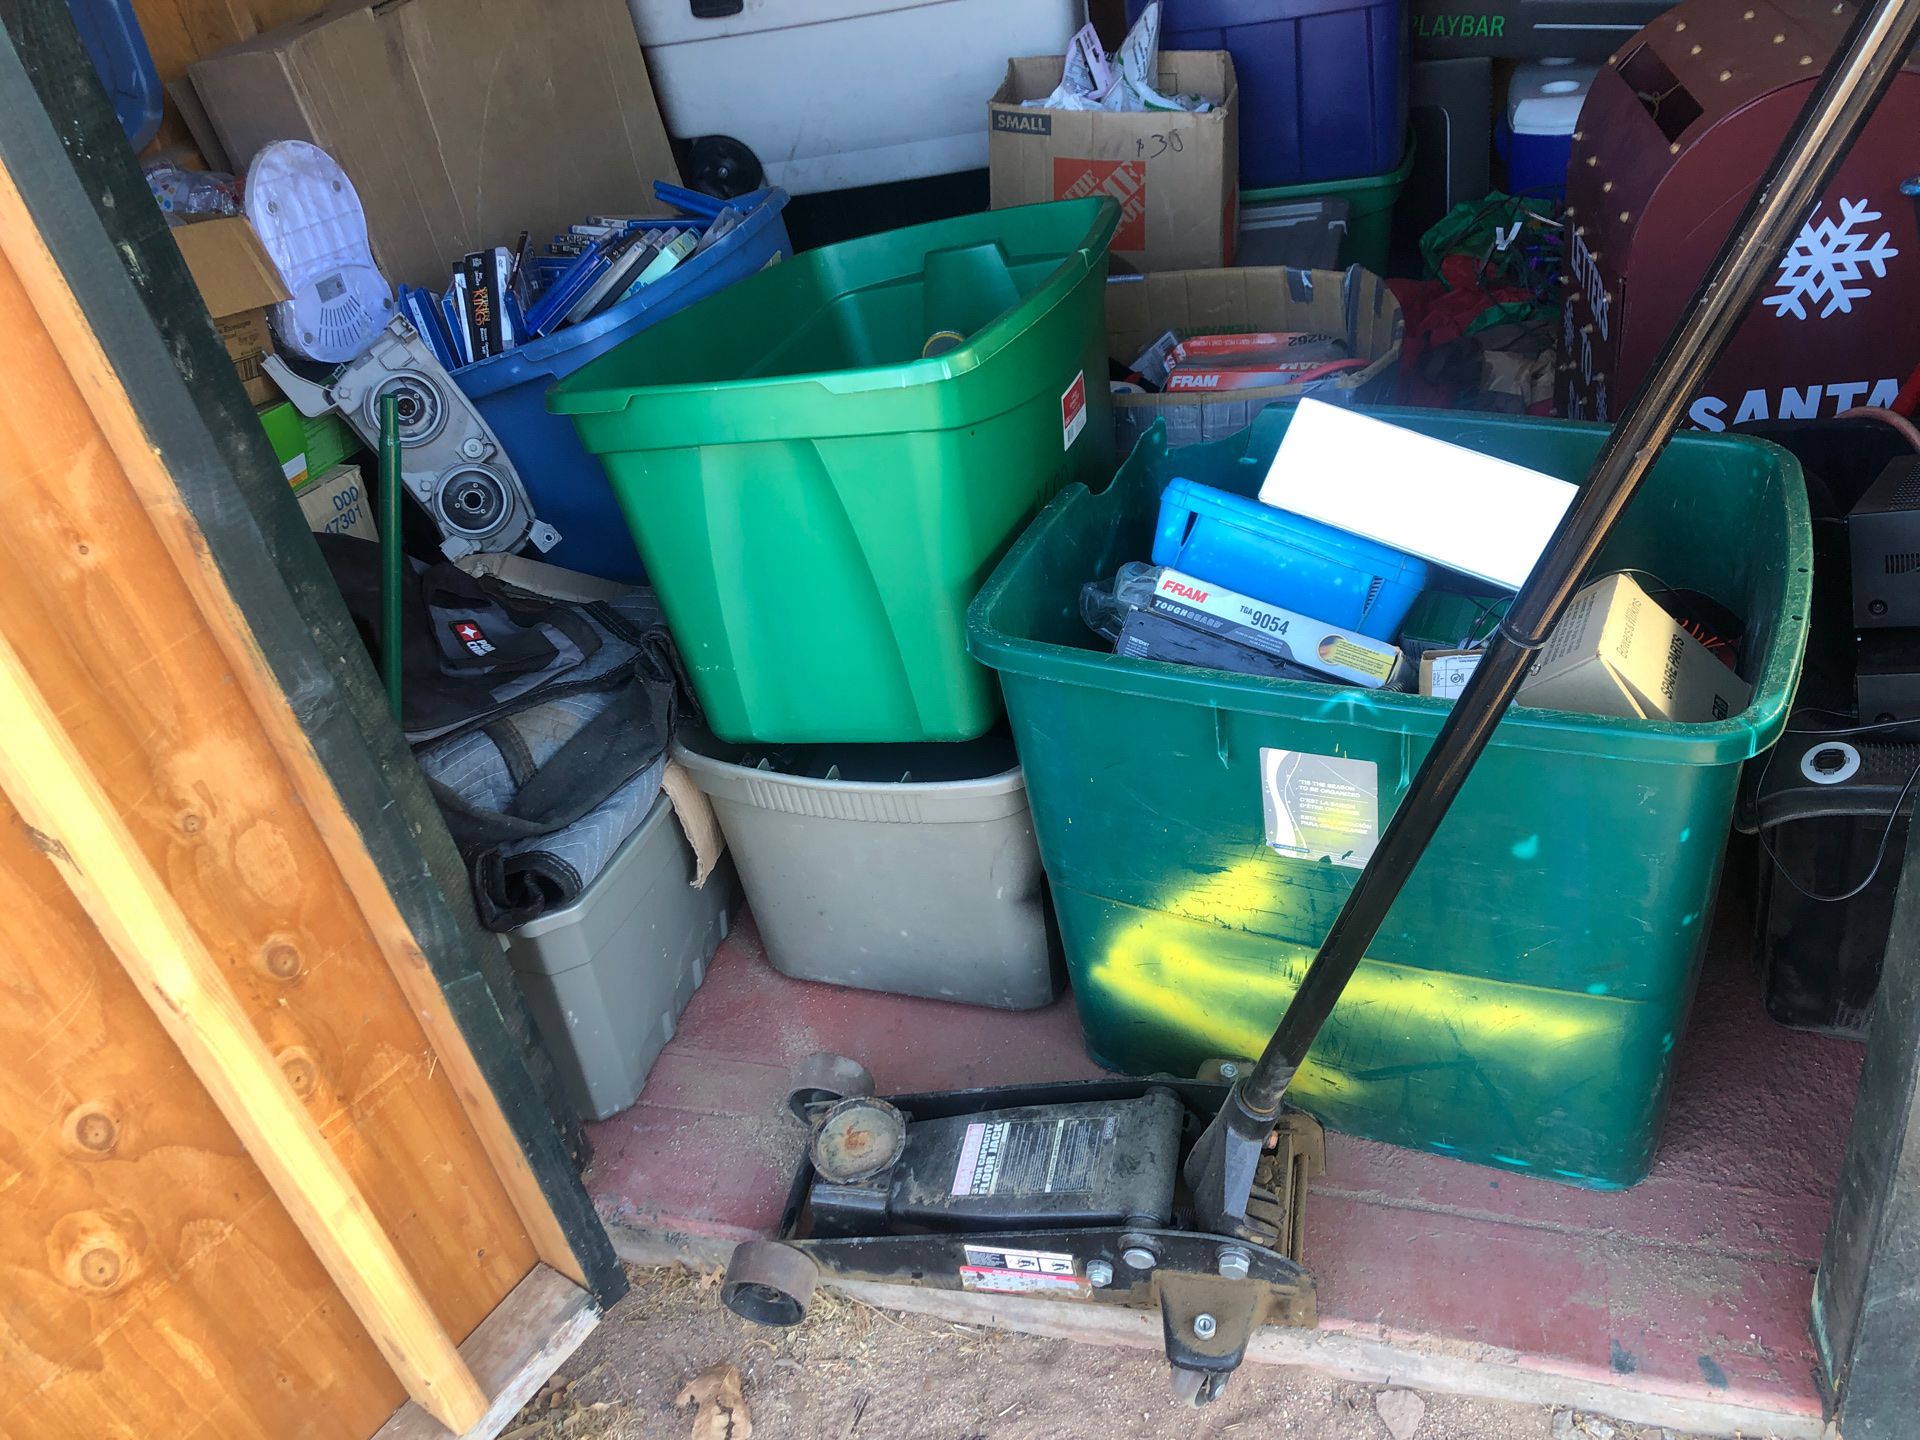 Shed items for sale